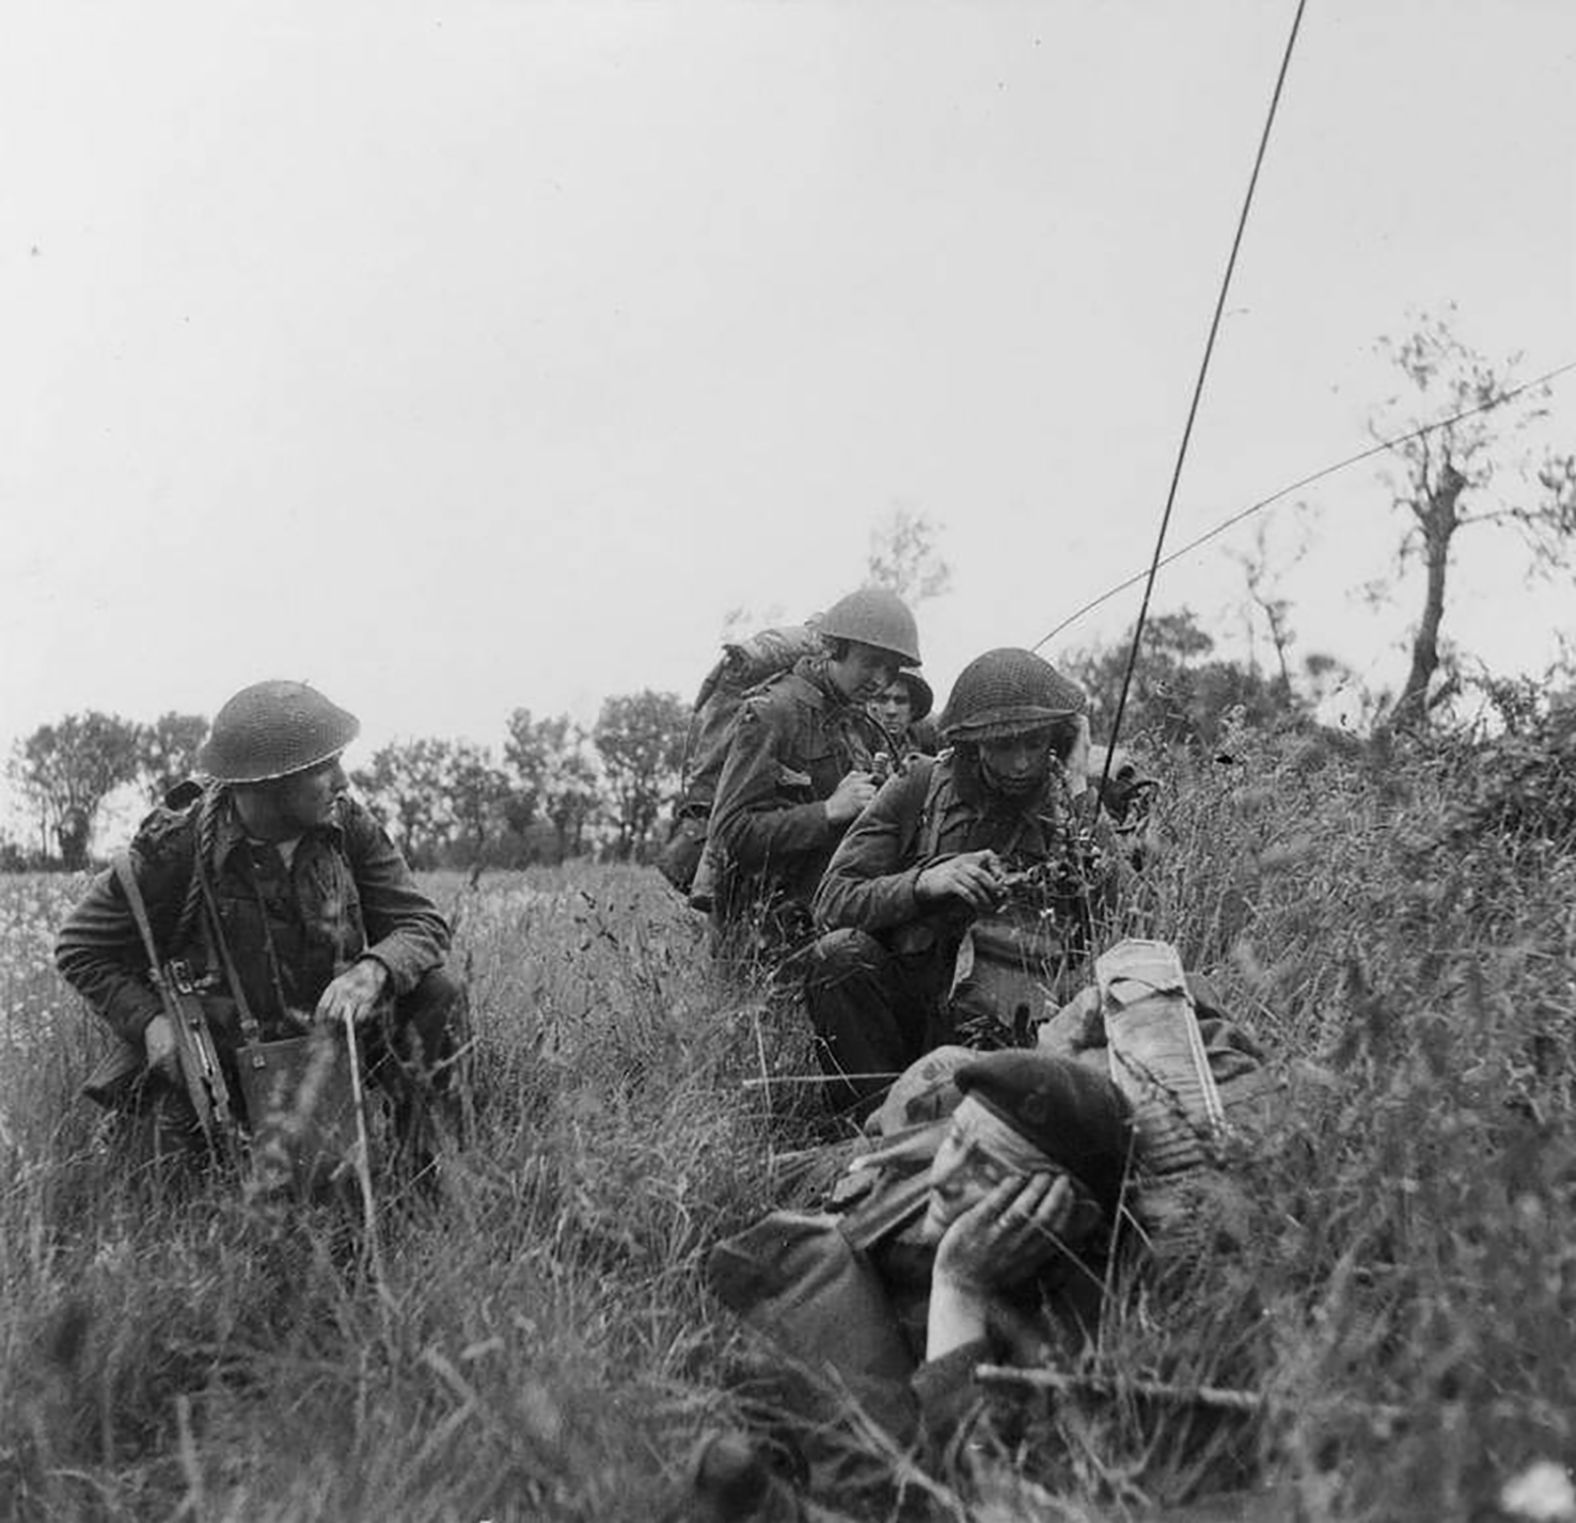 British troops use radios during the move inland.